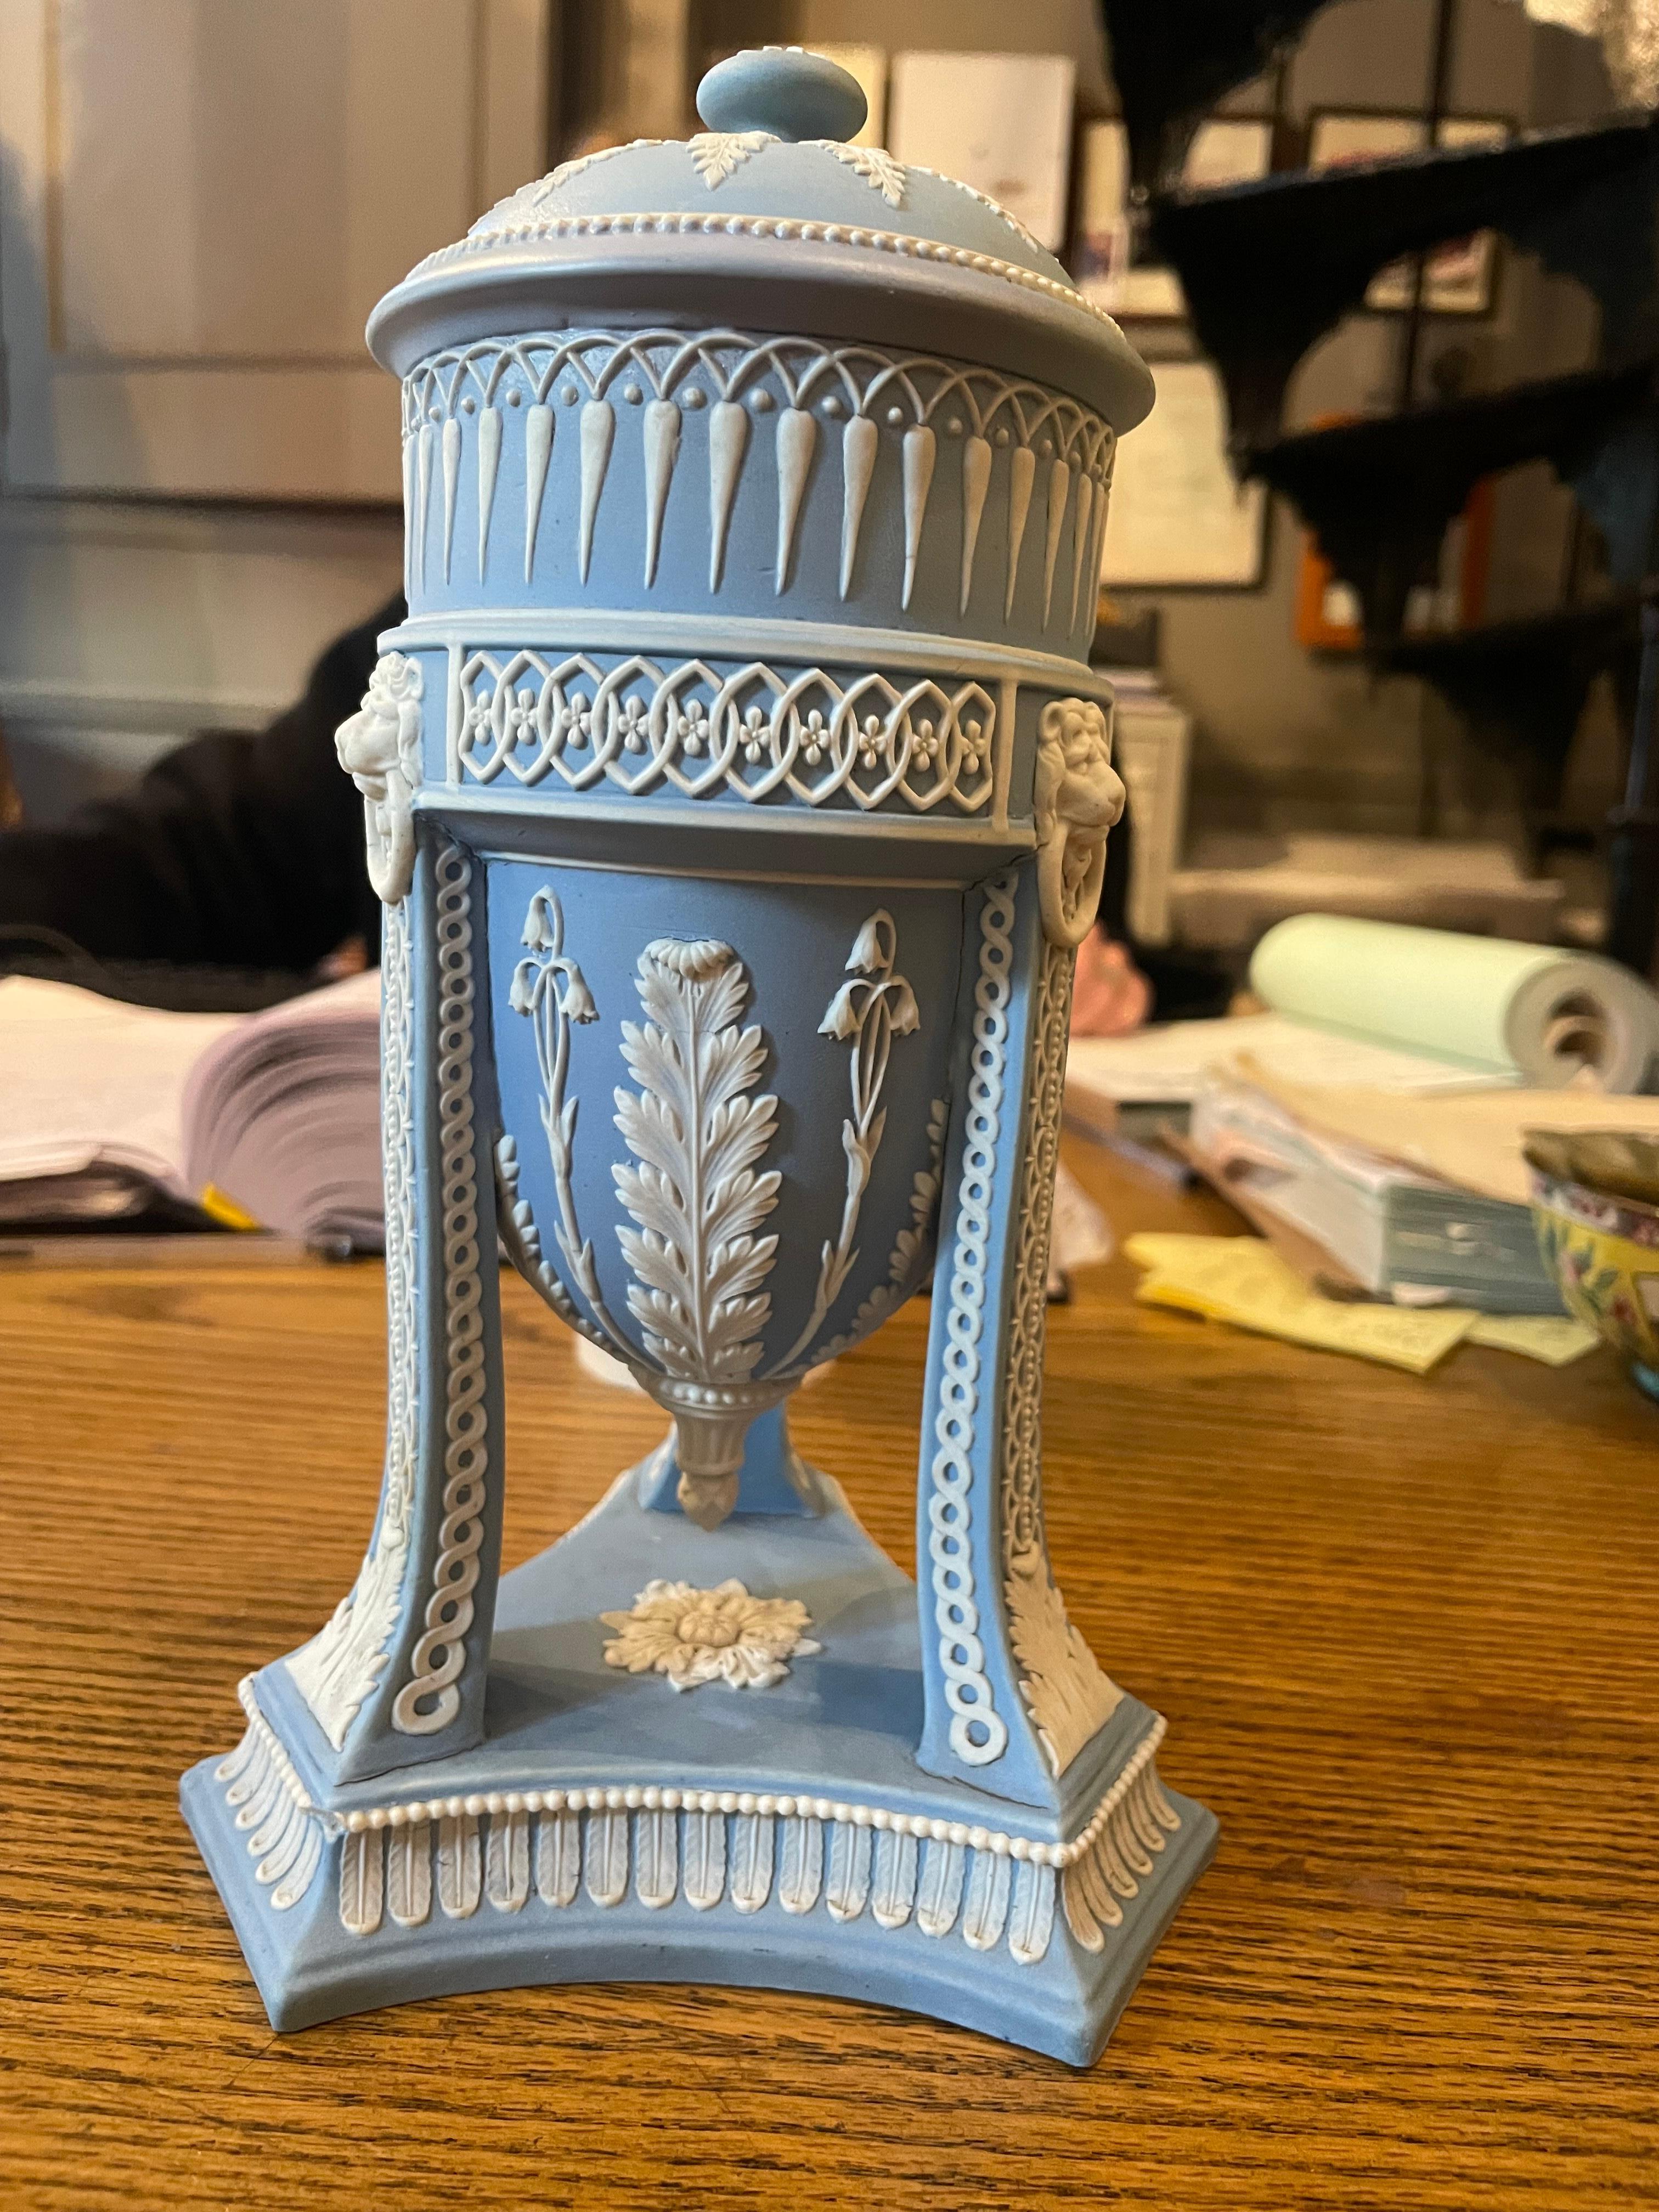 19th Century Wedgwood light blue Jasper tripod vase complete with cover with applied white relief of foliage and bell flowers, the terminals with lion masks and rings, all standing atop a triangular base.